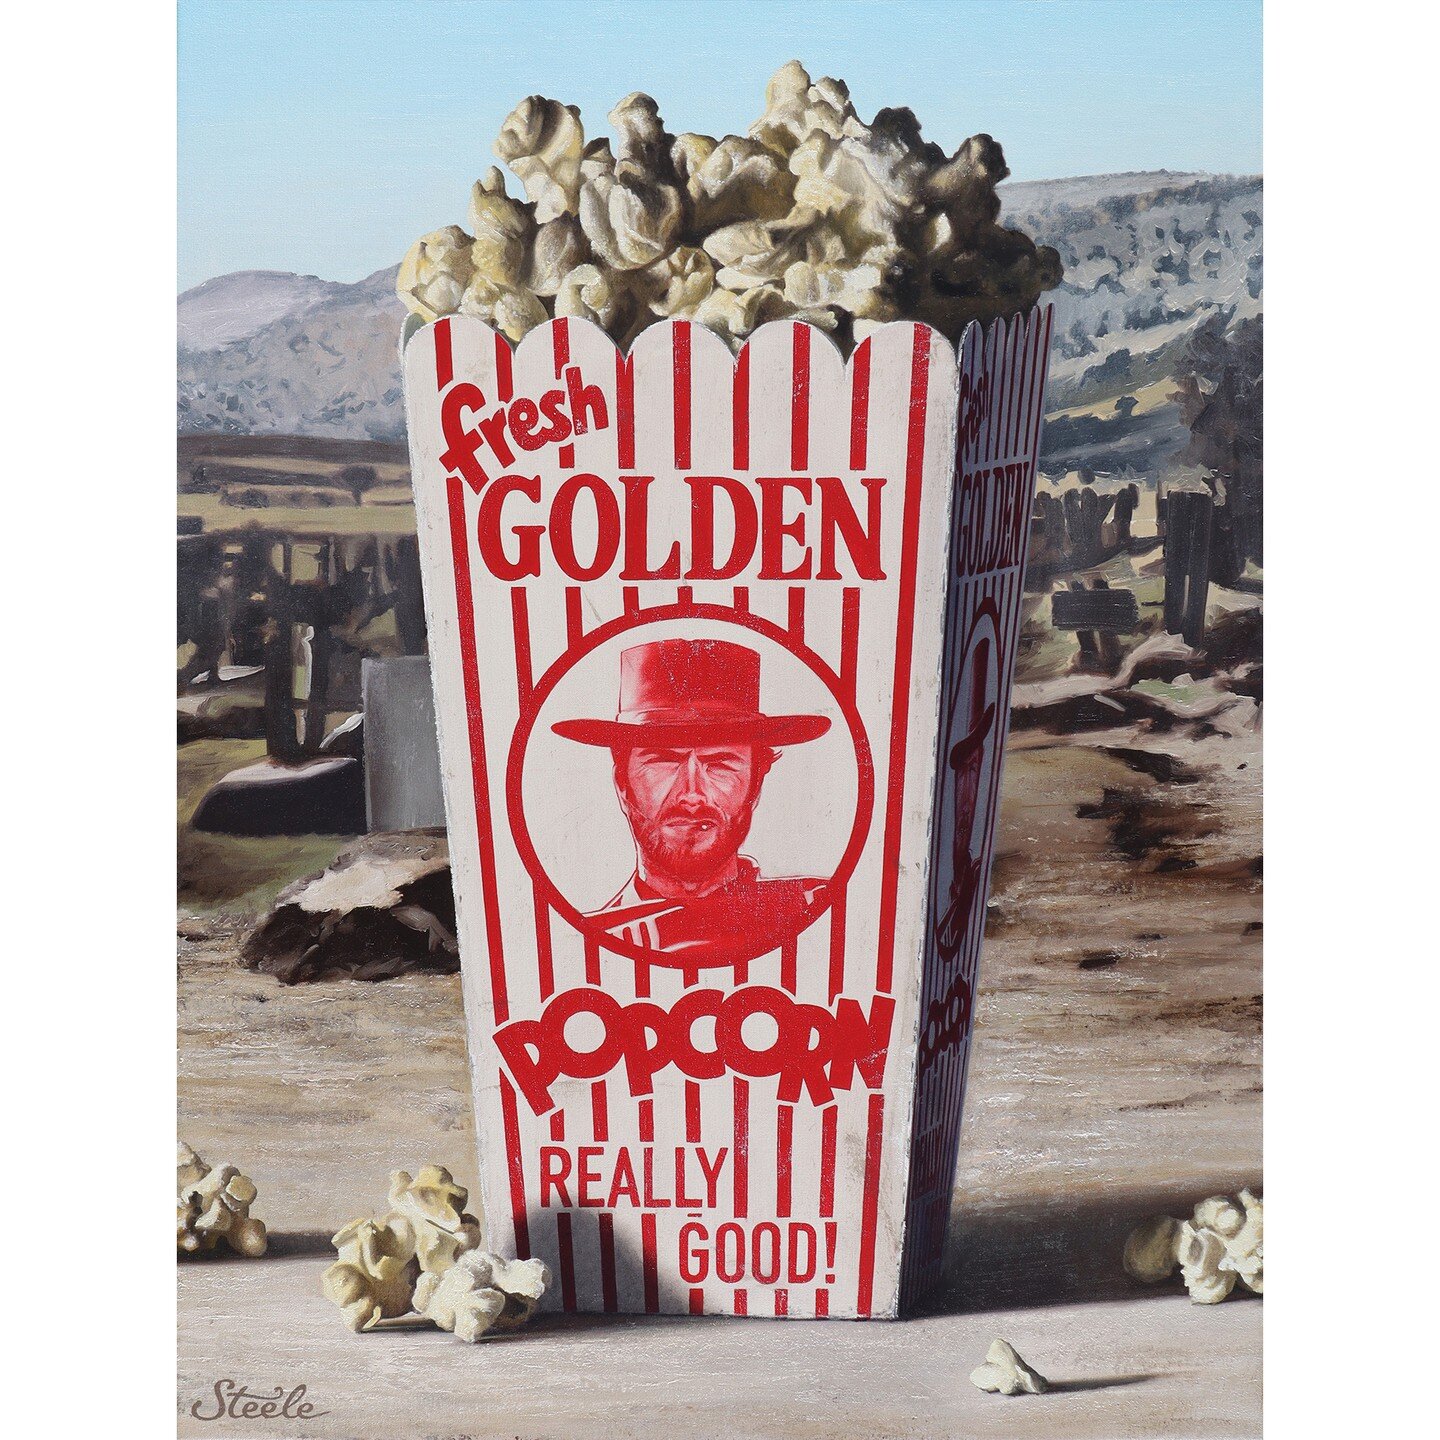 Busy winter in the studio, working through some commissions while also getting ready for a March exhibition at Altamira Fine Art in Scottsdale titled 'Good AZ Gold'. 

@altamirafineart 
#arizona #scottsdale #gold #popcorn #thegoodthebadandtheugly #su